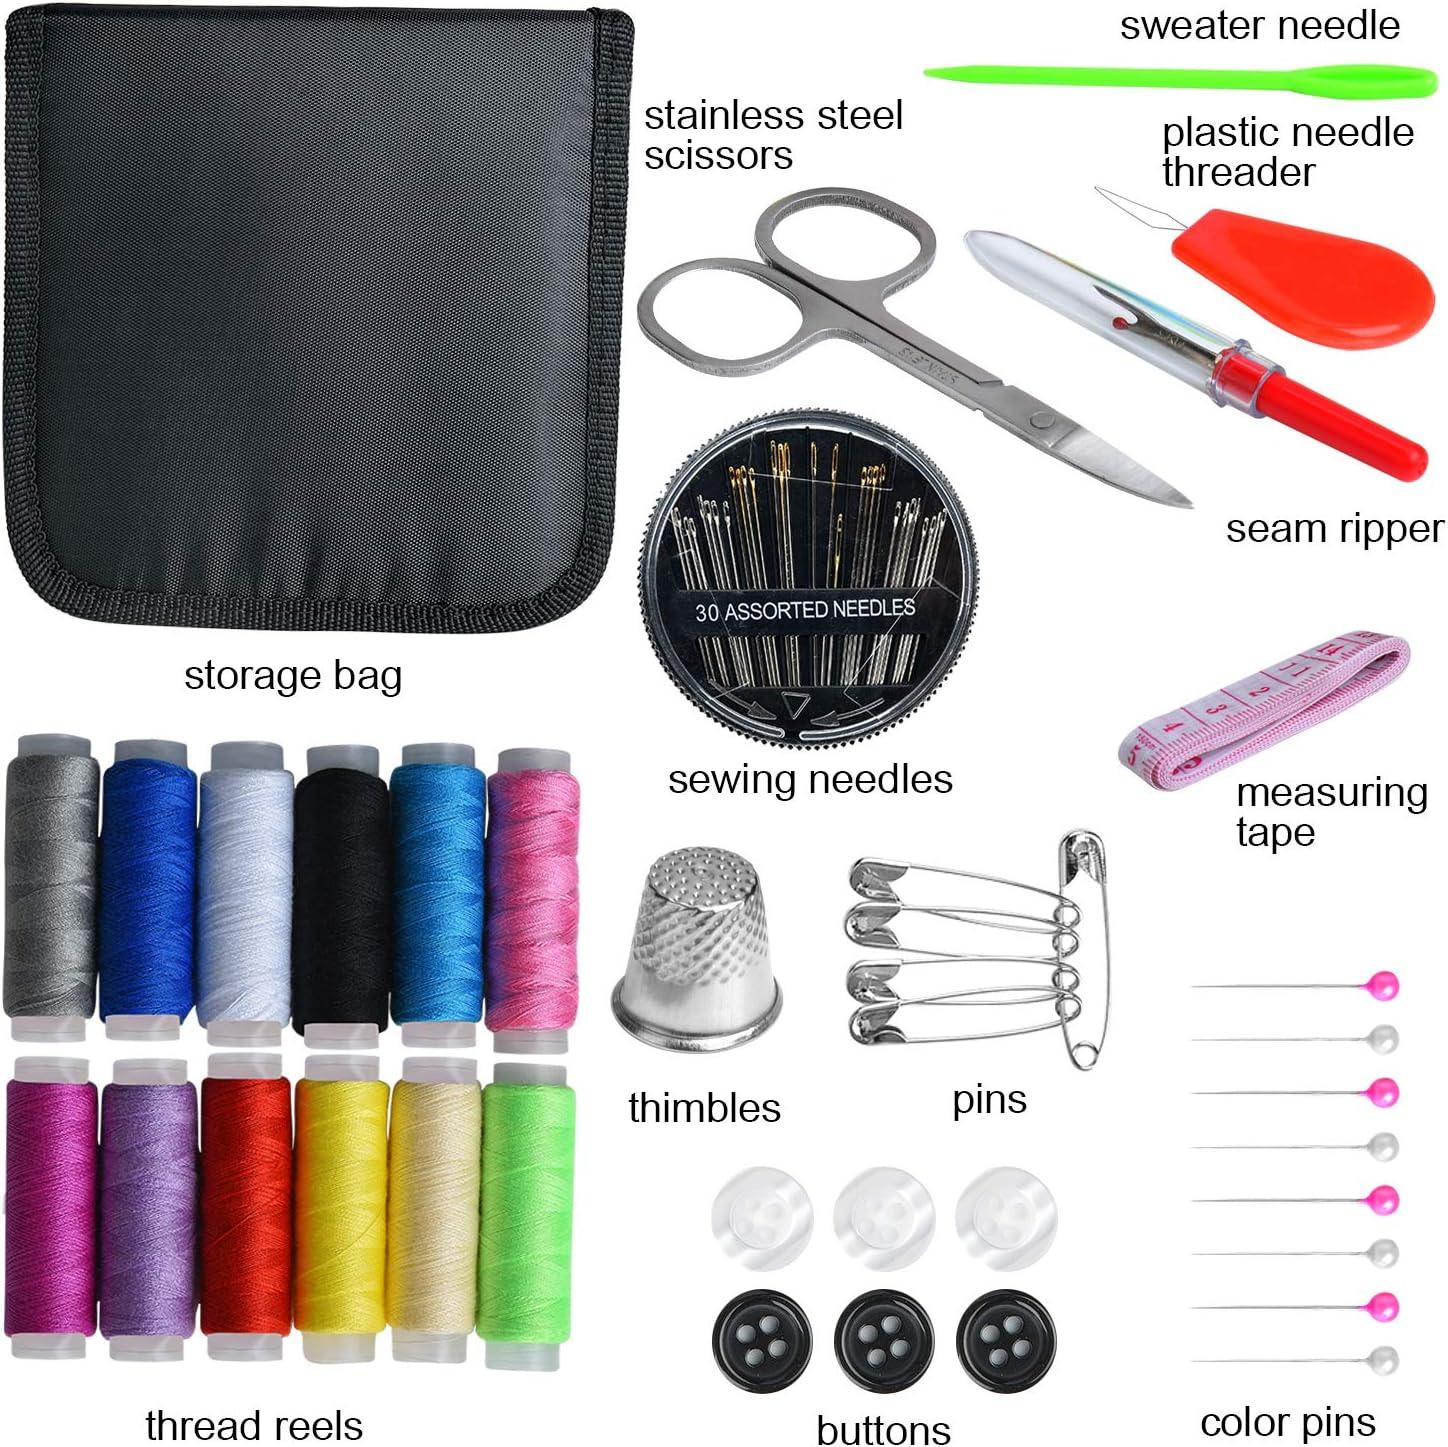 Sewing Kit, Zipper Portable Mini Sewing Kits for Adults, Kids, Traveler,  Beginner, Emergency, Family Repair, Sewing Supplies with 12 Color Thread